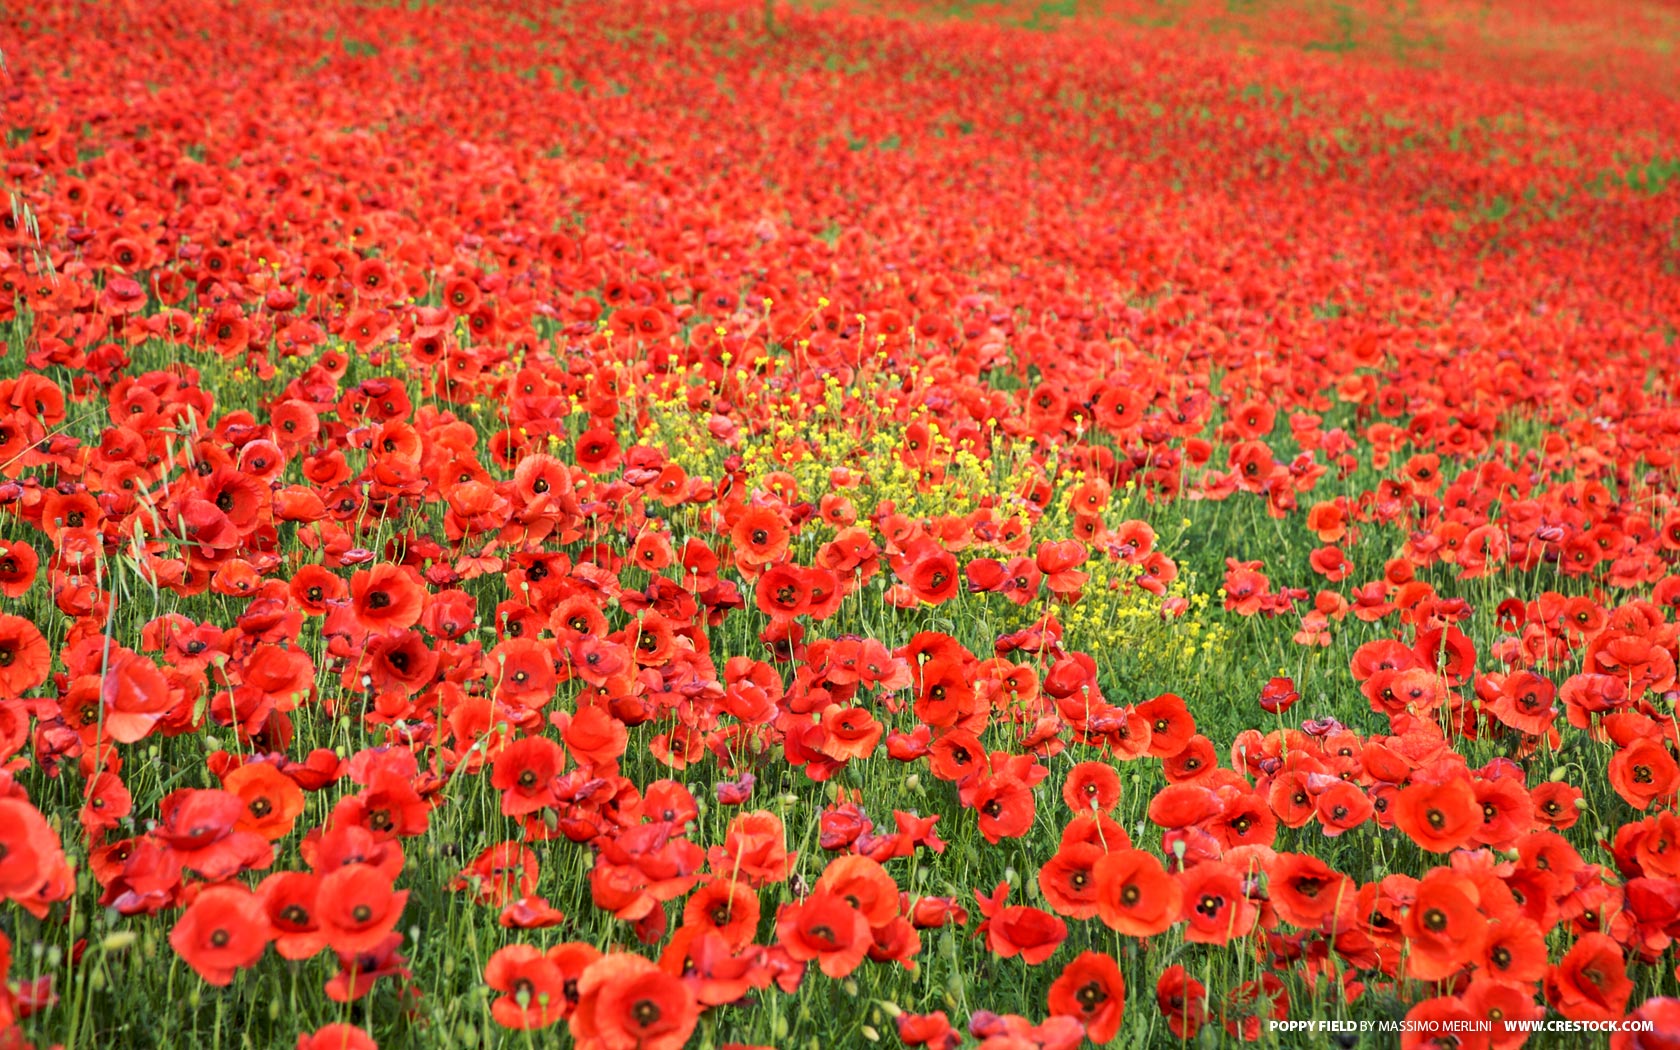 Field Of Poppies Nature Wallpaper Image Featuring Flowers And Plants